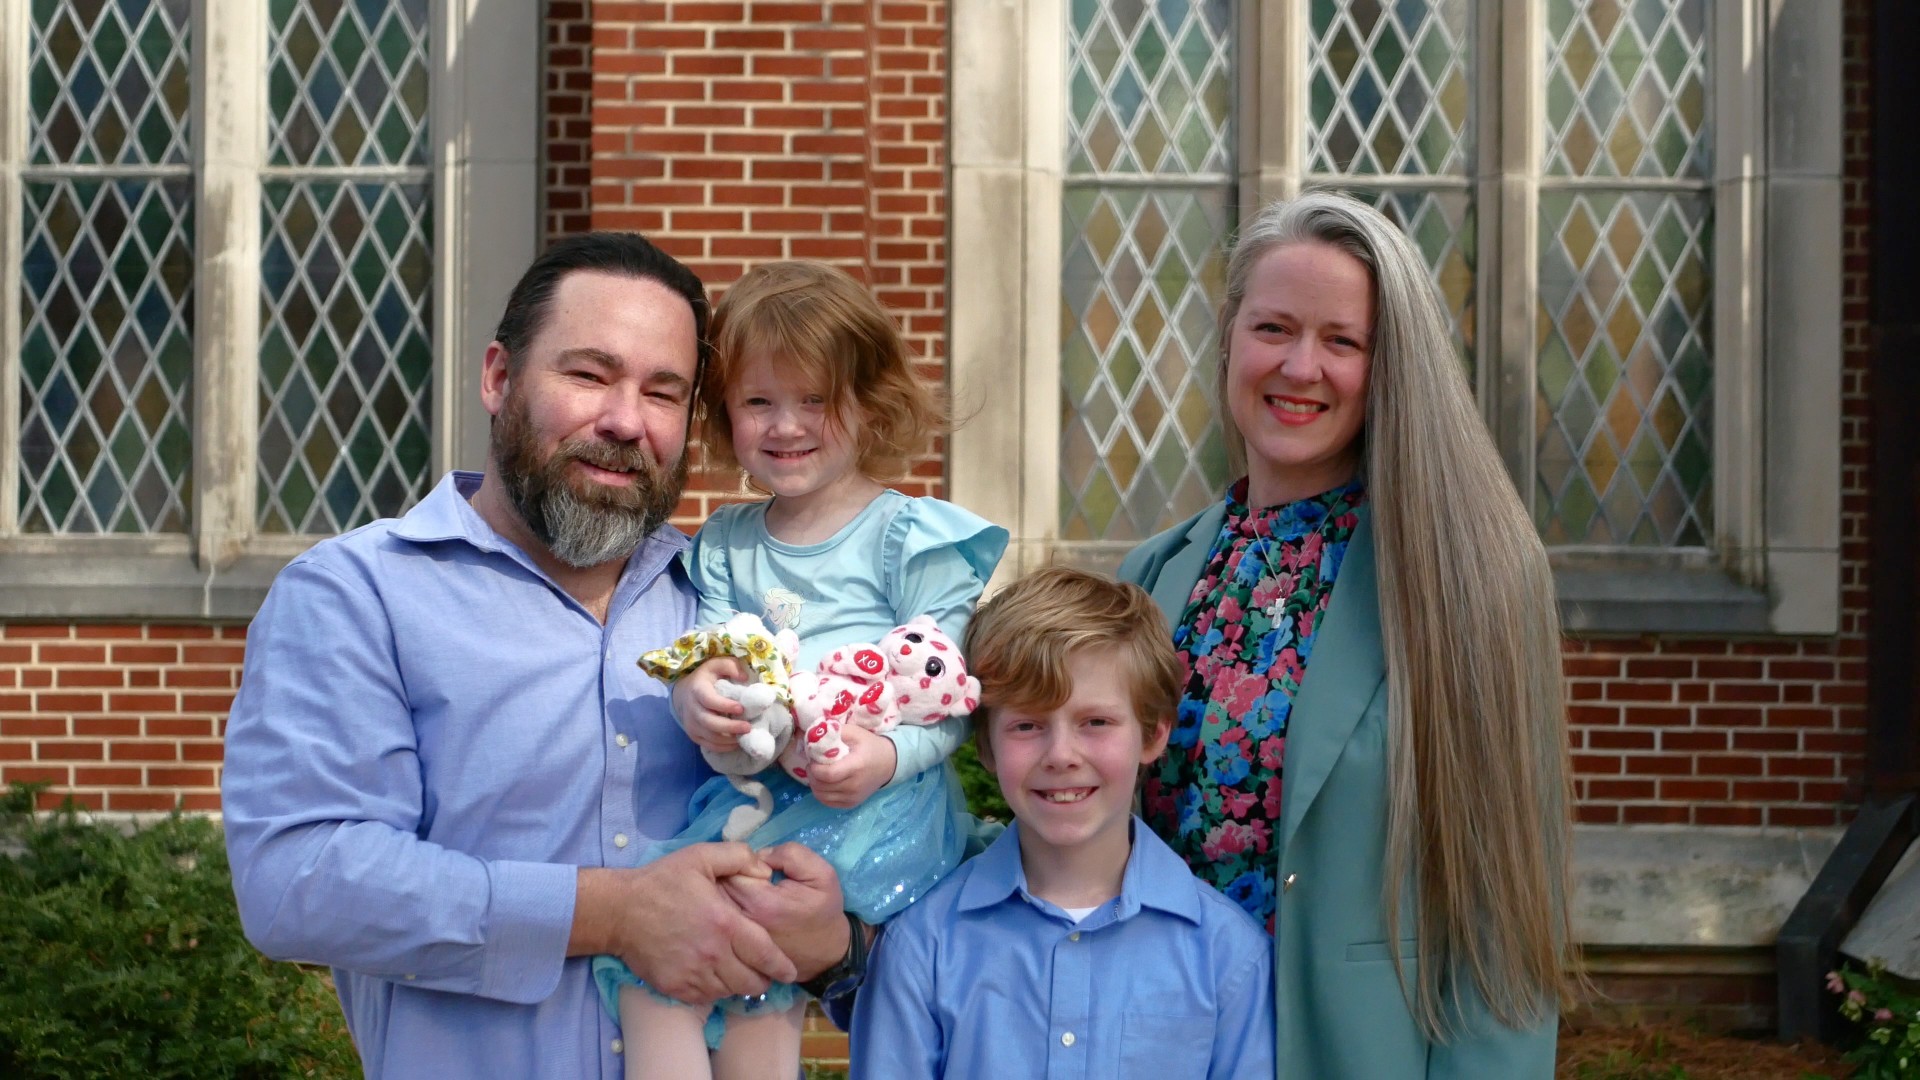 Get to know our new Pastor, Nicole Jiskoot, and her family